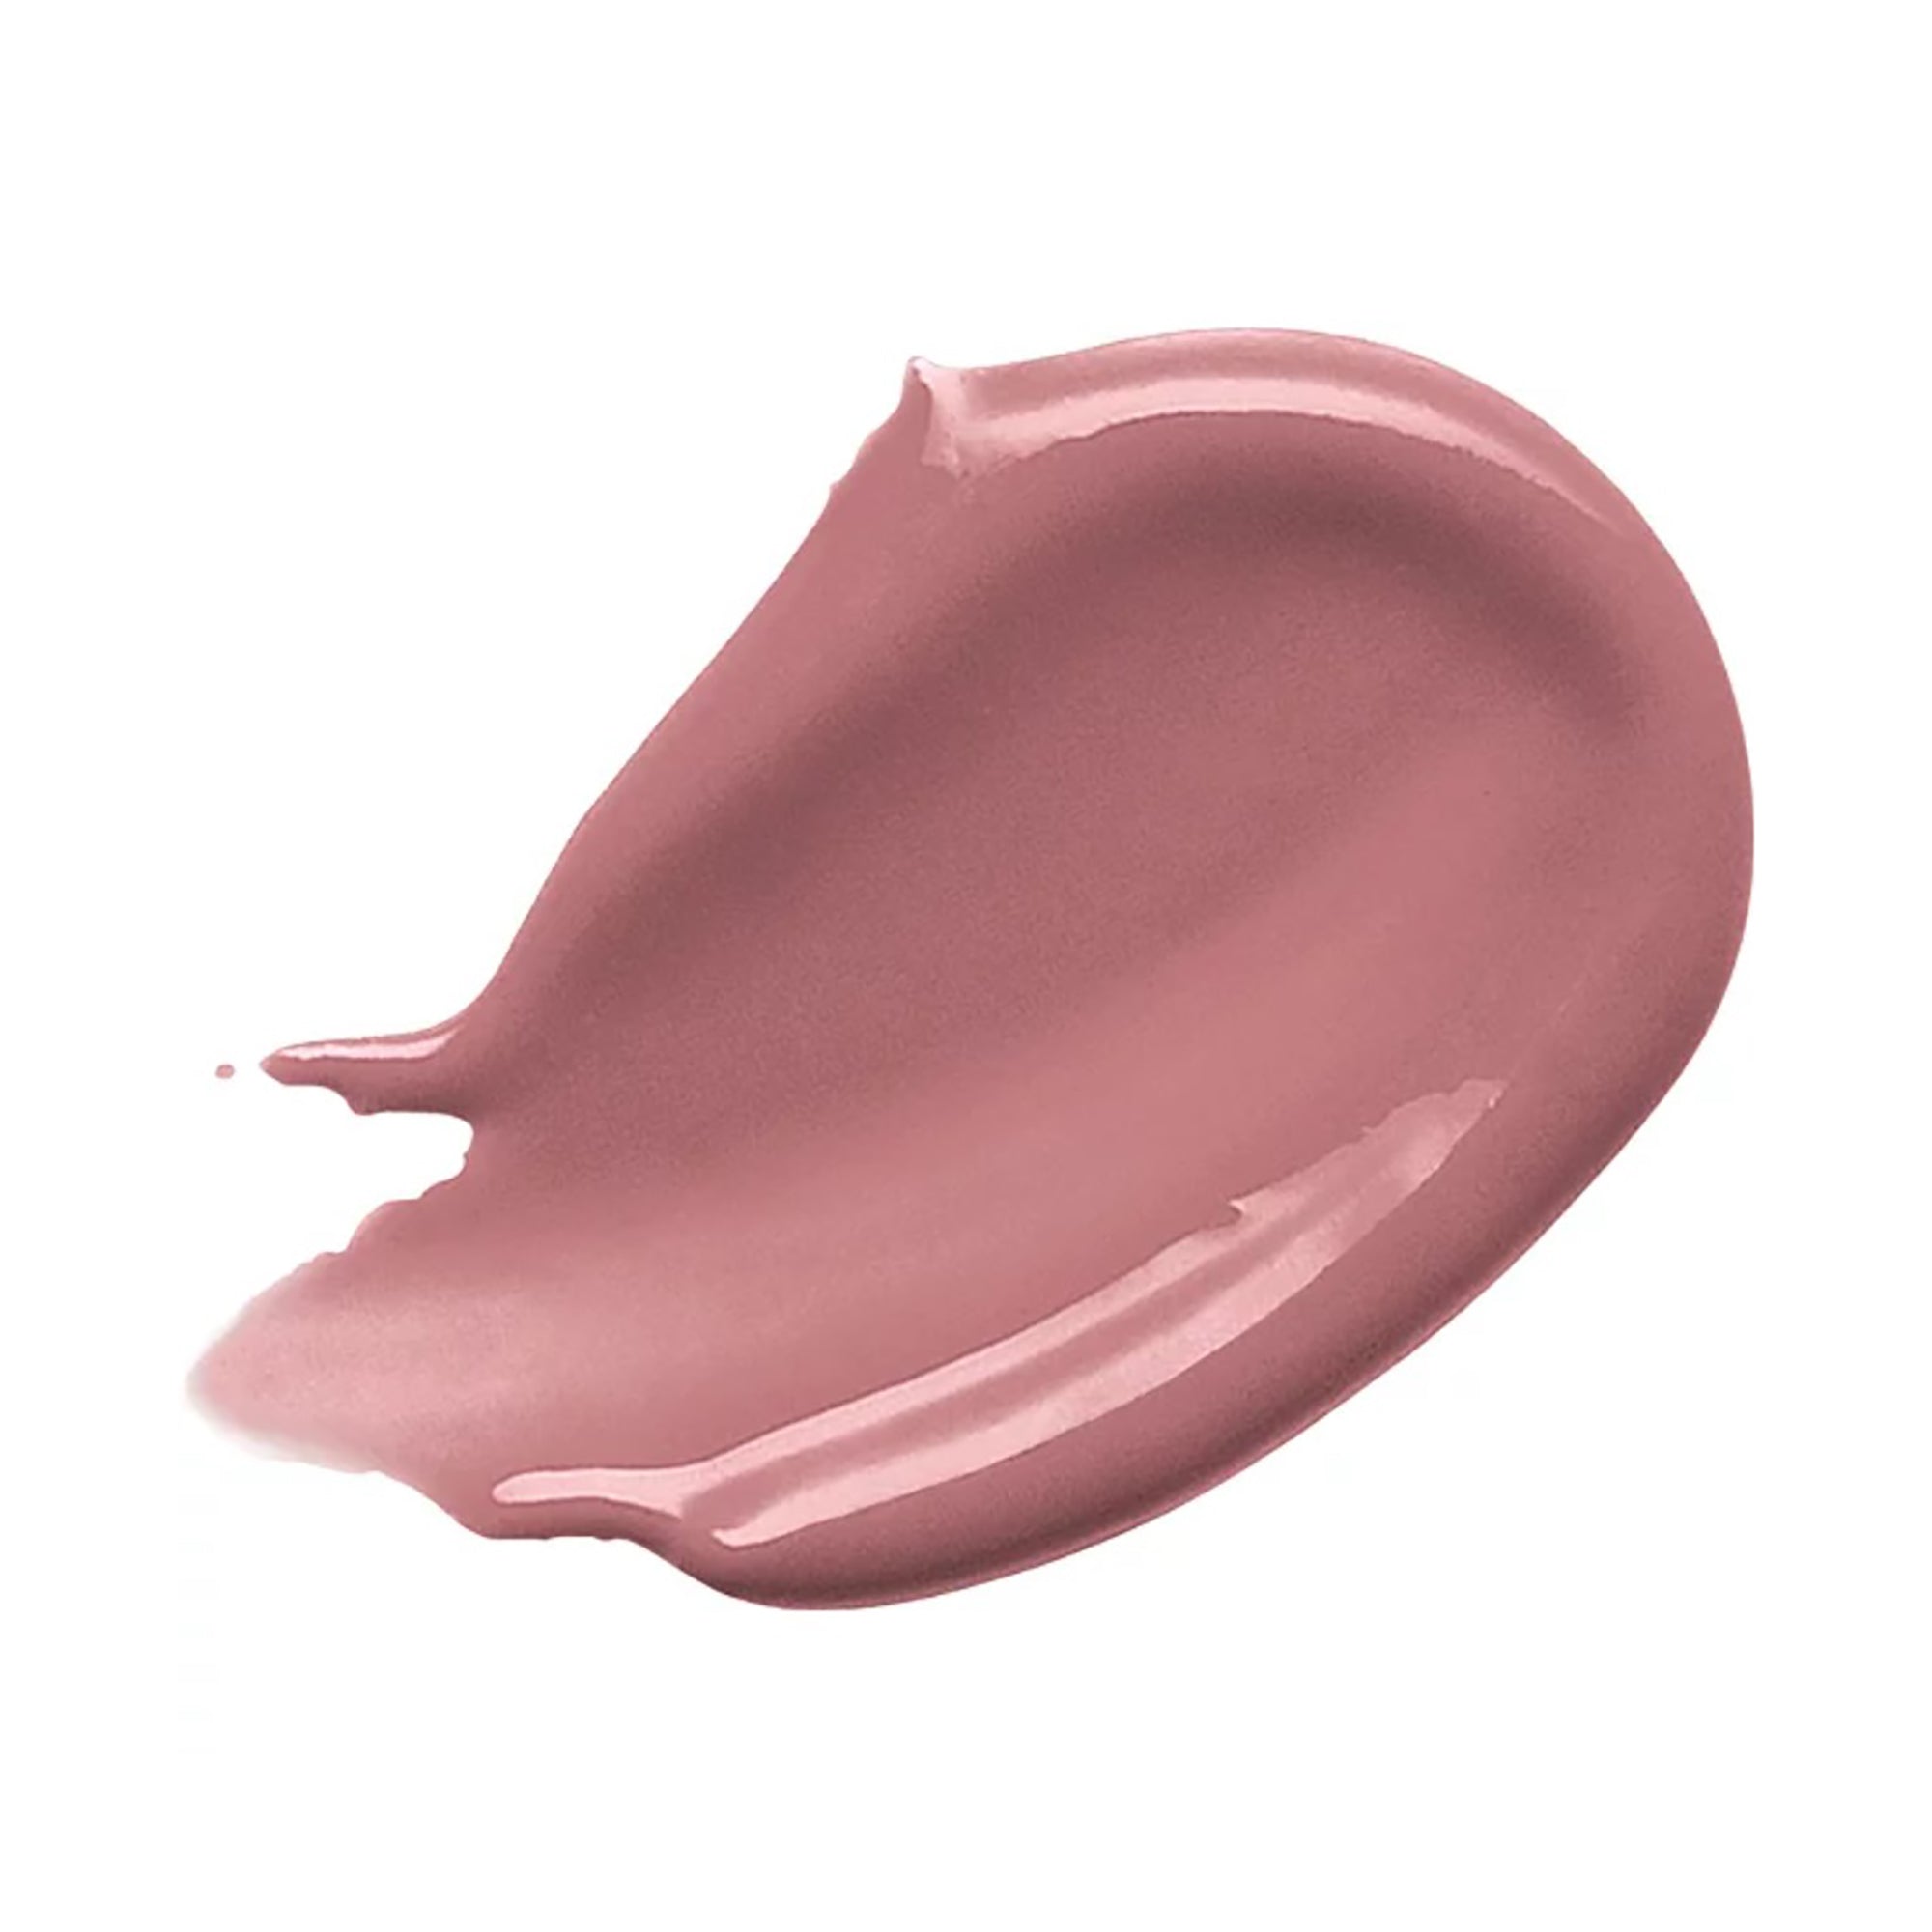 Buxom Full-on Plumping Lip Cream Gloss / DOLLY / Swatch